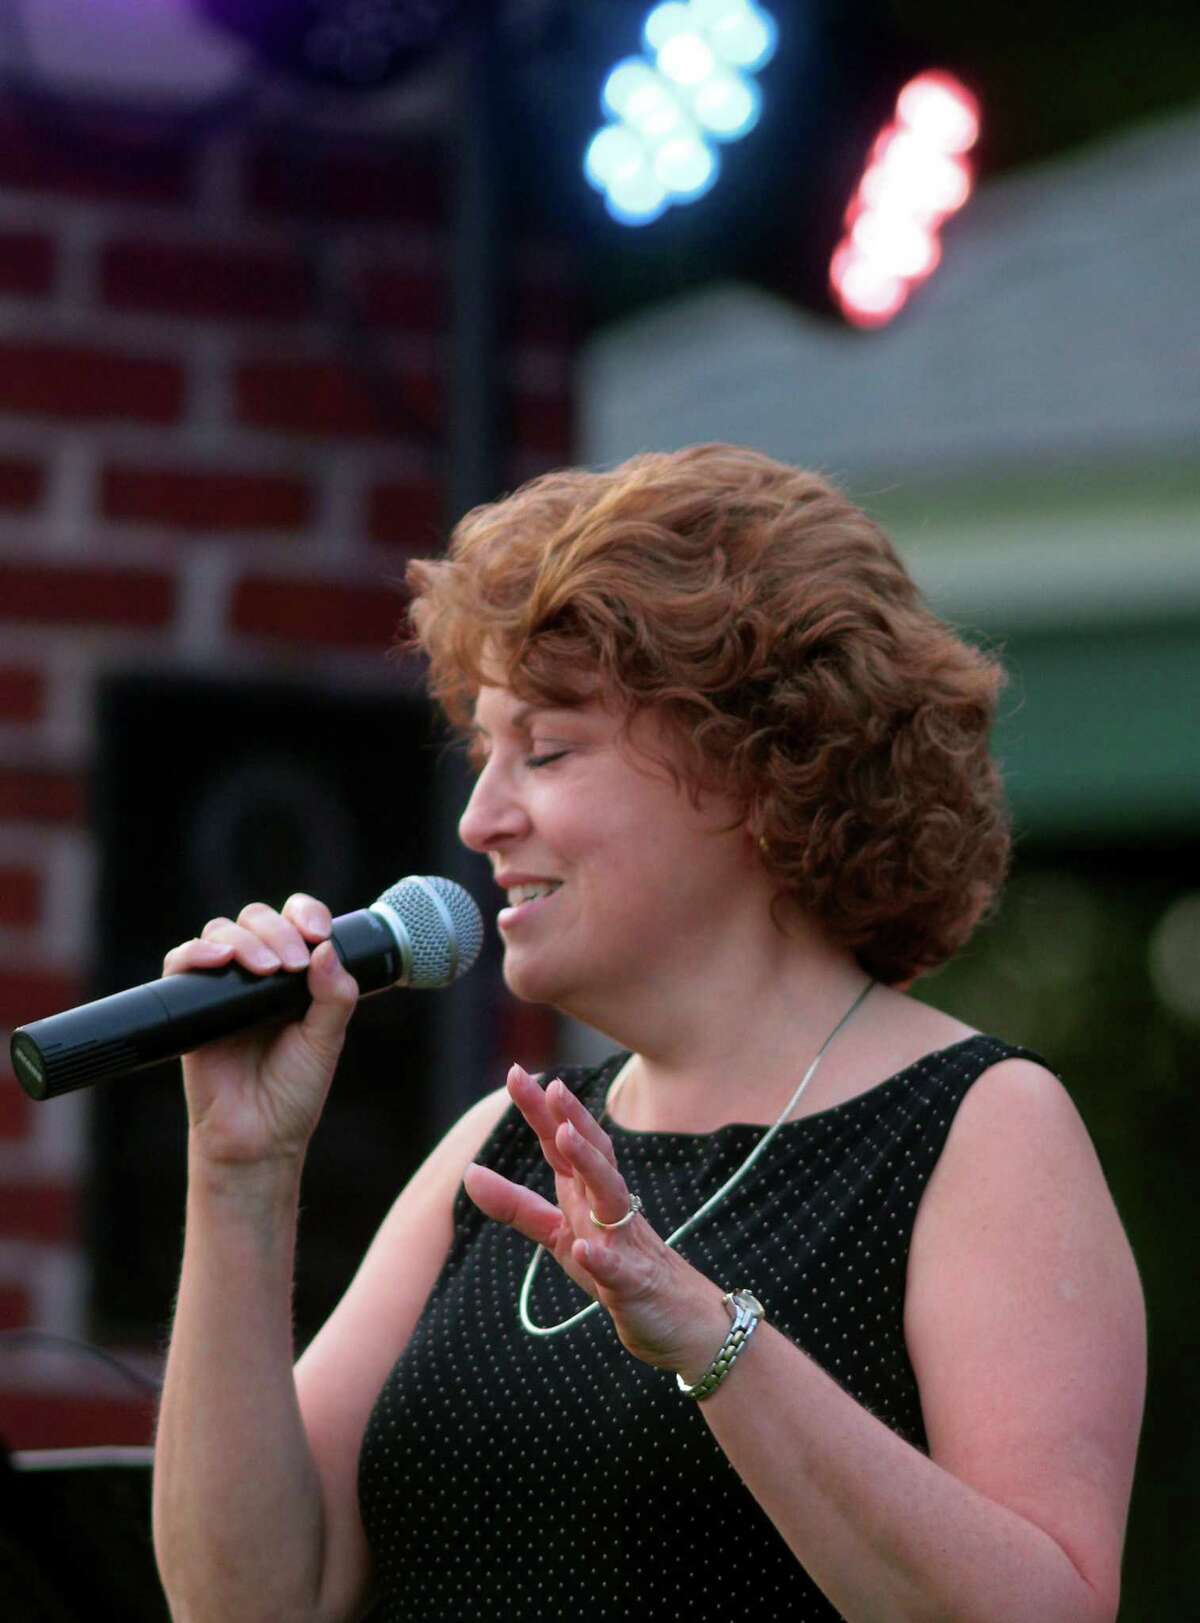 The Little Big Band's Joyce Medling performs during Shelton's Summer Concert series at Riverview Park in Shelton, Conn., on Wednesday Aug.26, 2020.